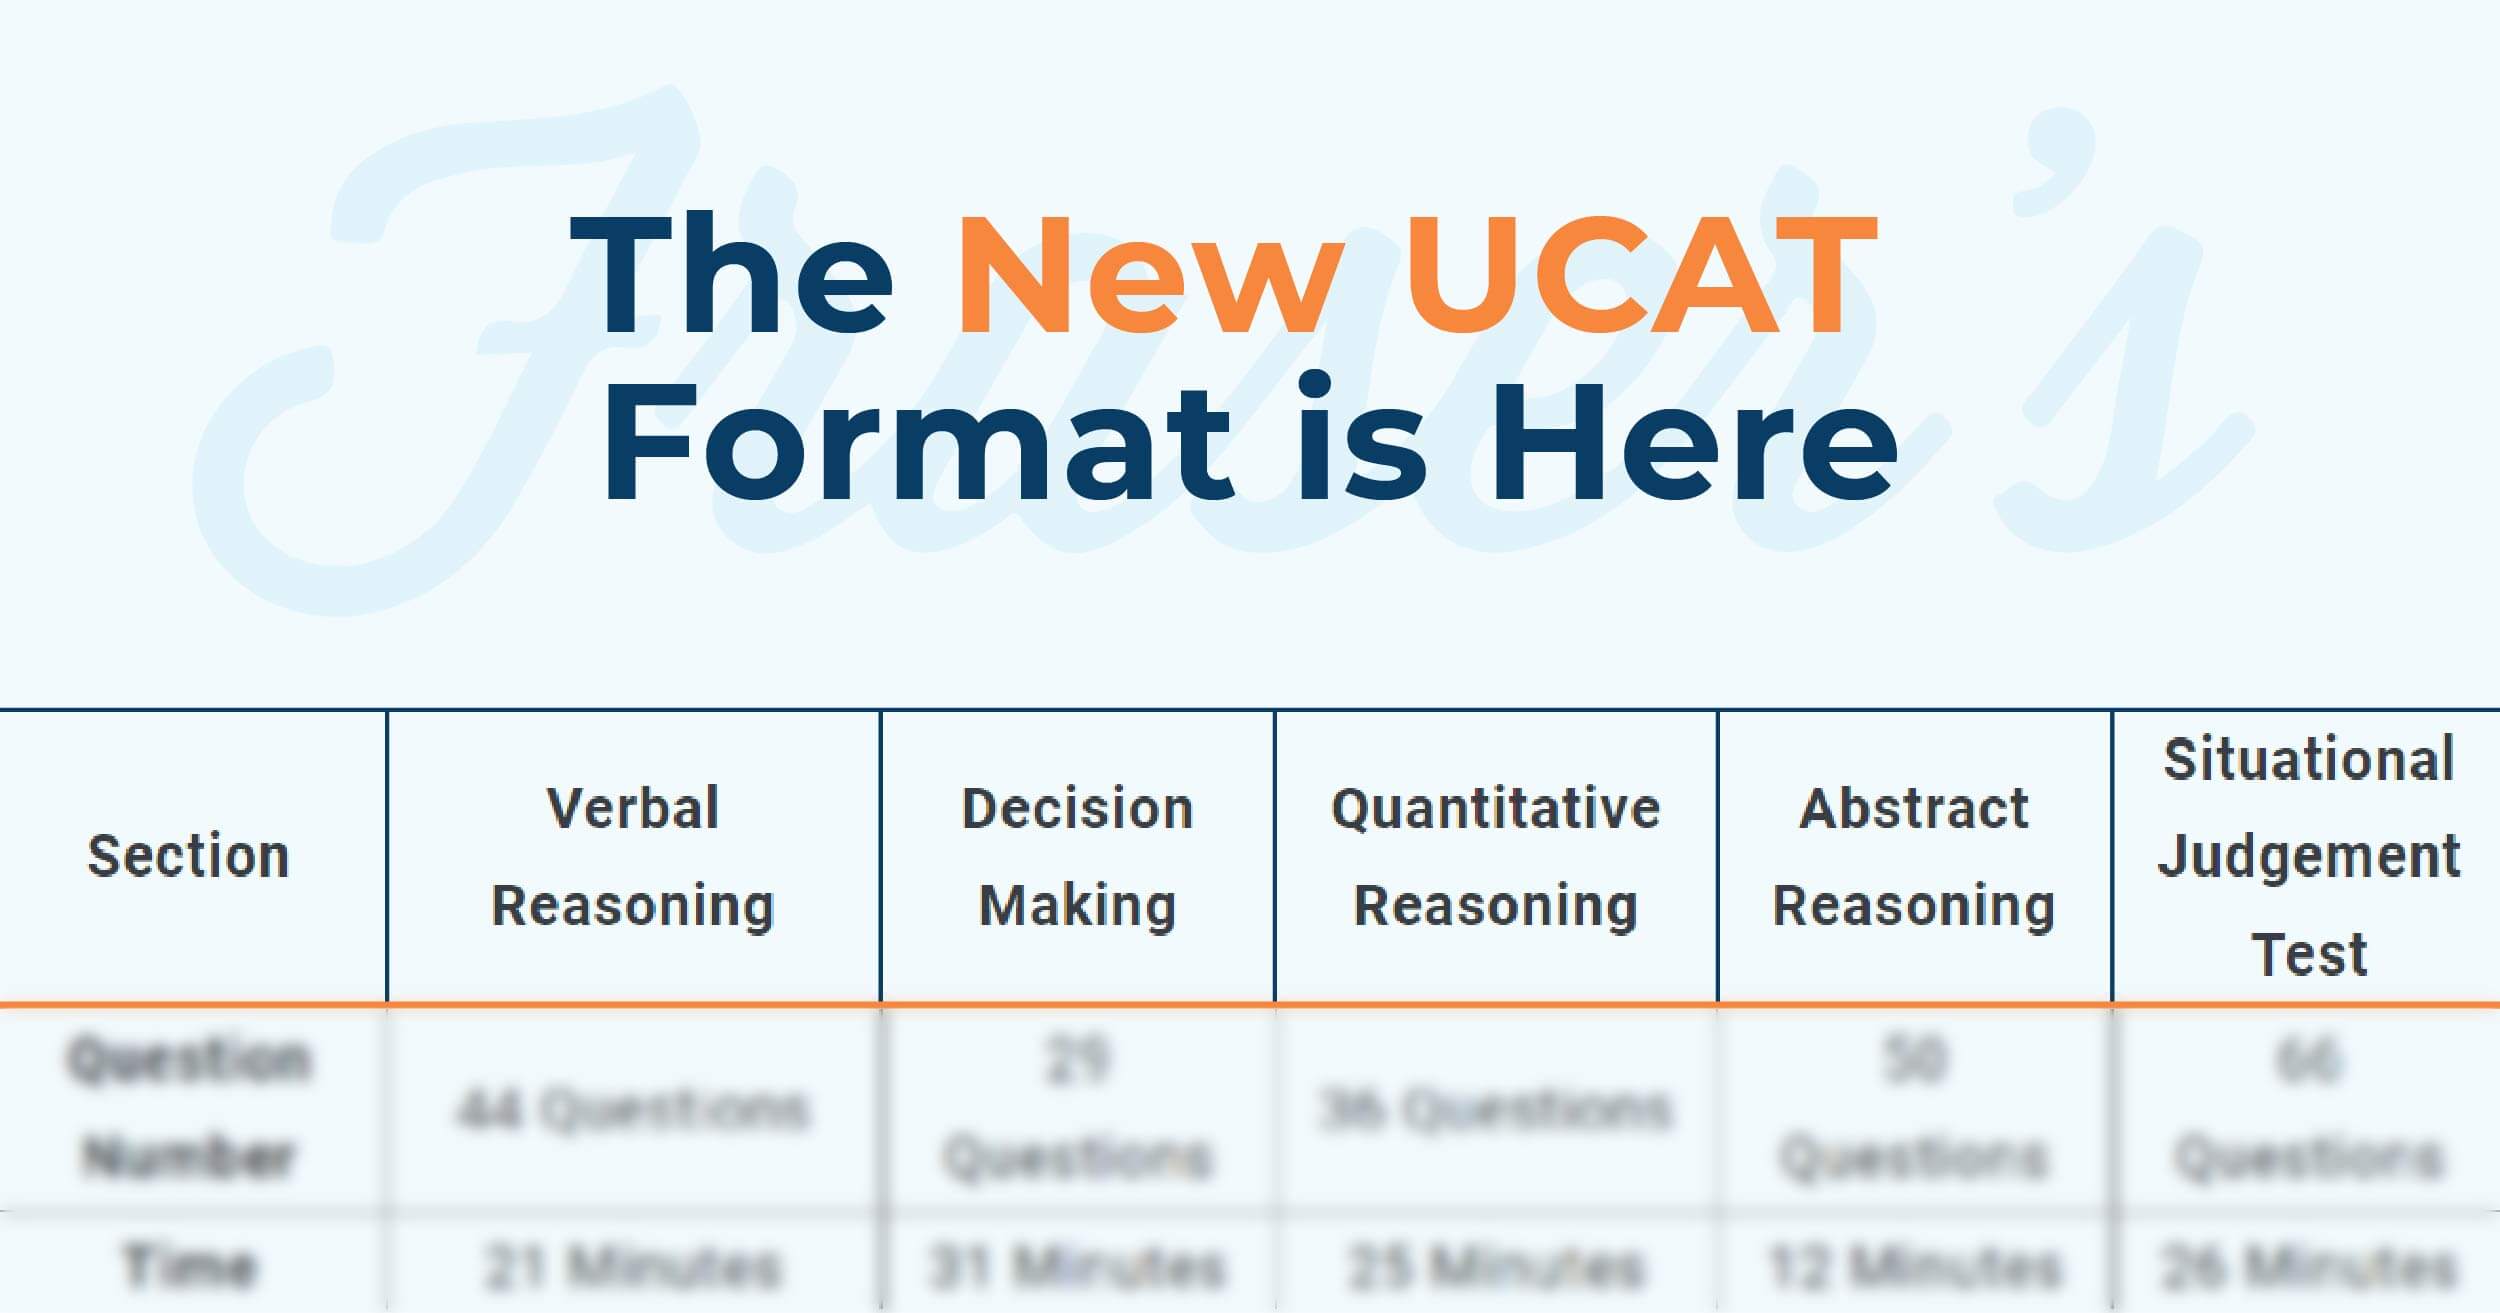 What is the UCAT Image